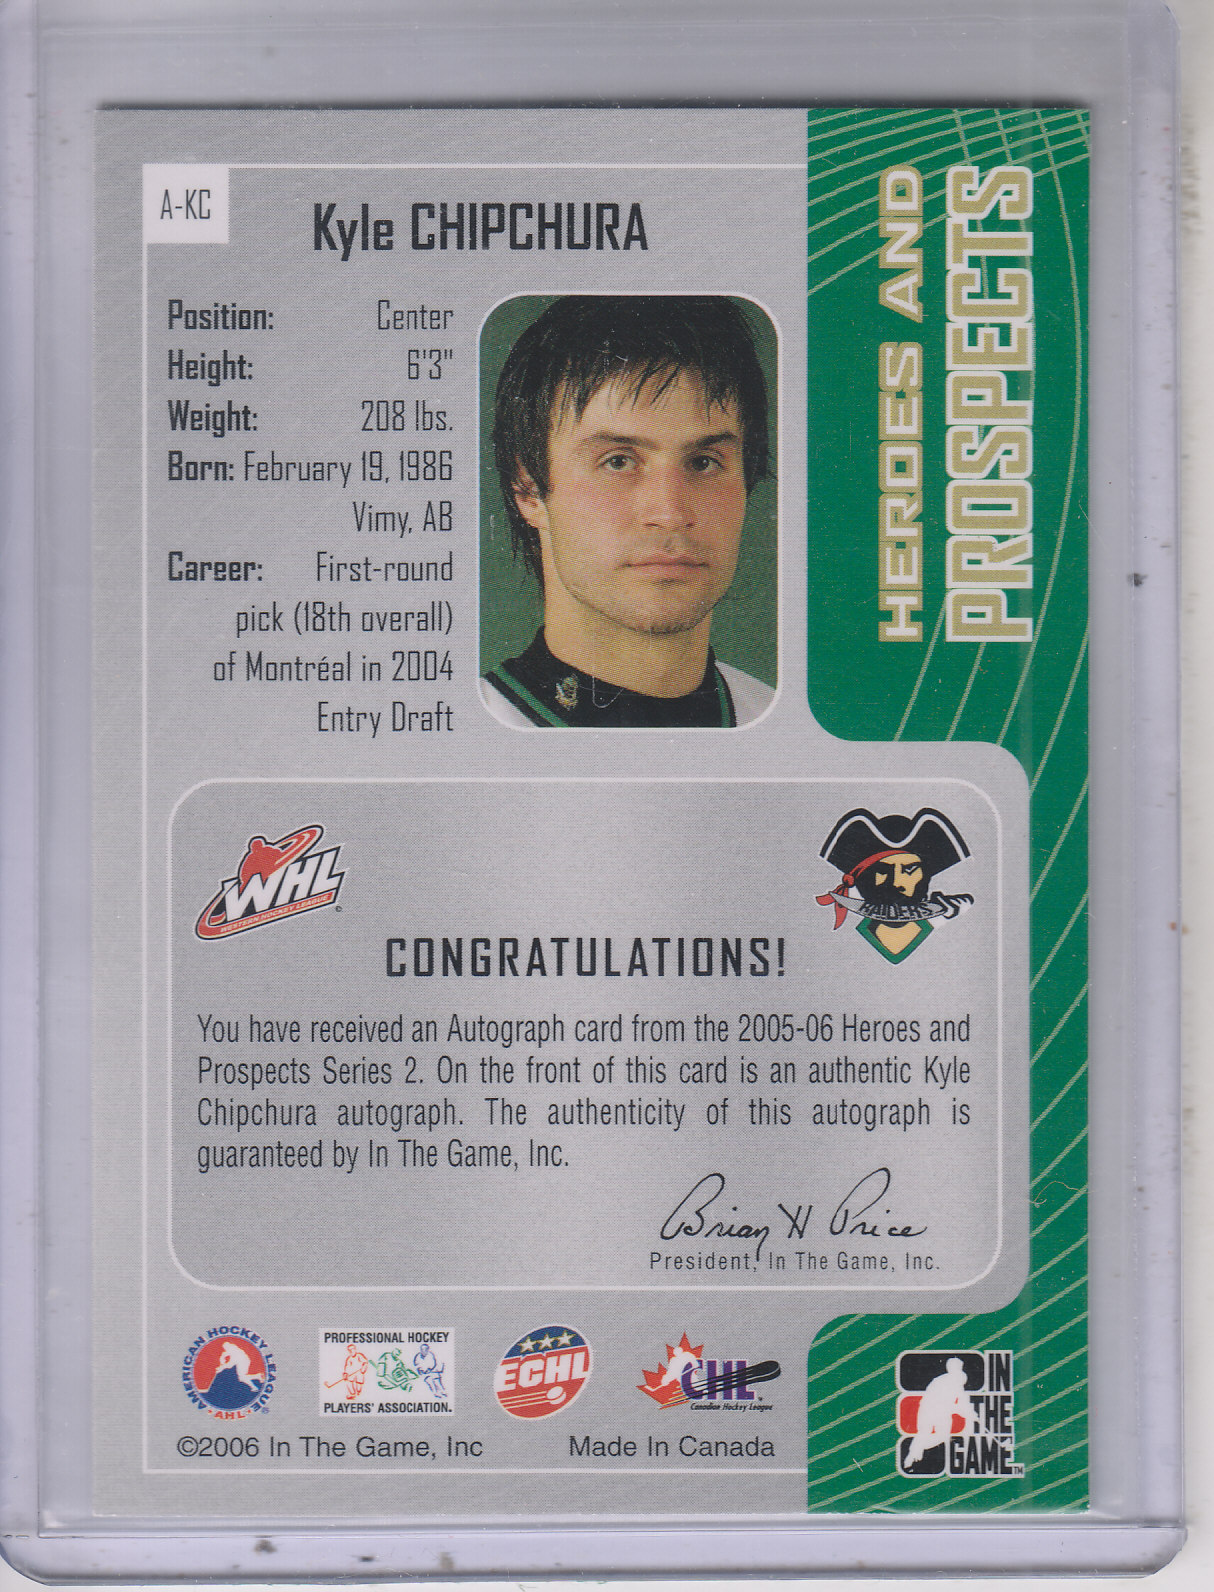 2005-06 ITG Heroes and Prospects Autographs Series II #AKC Kyle Chipchura back image